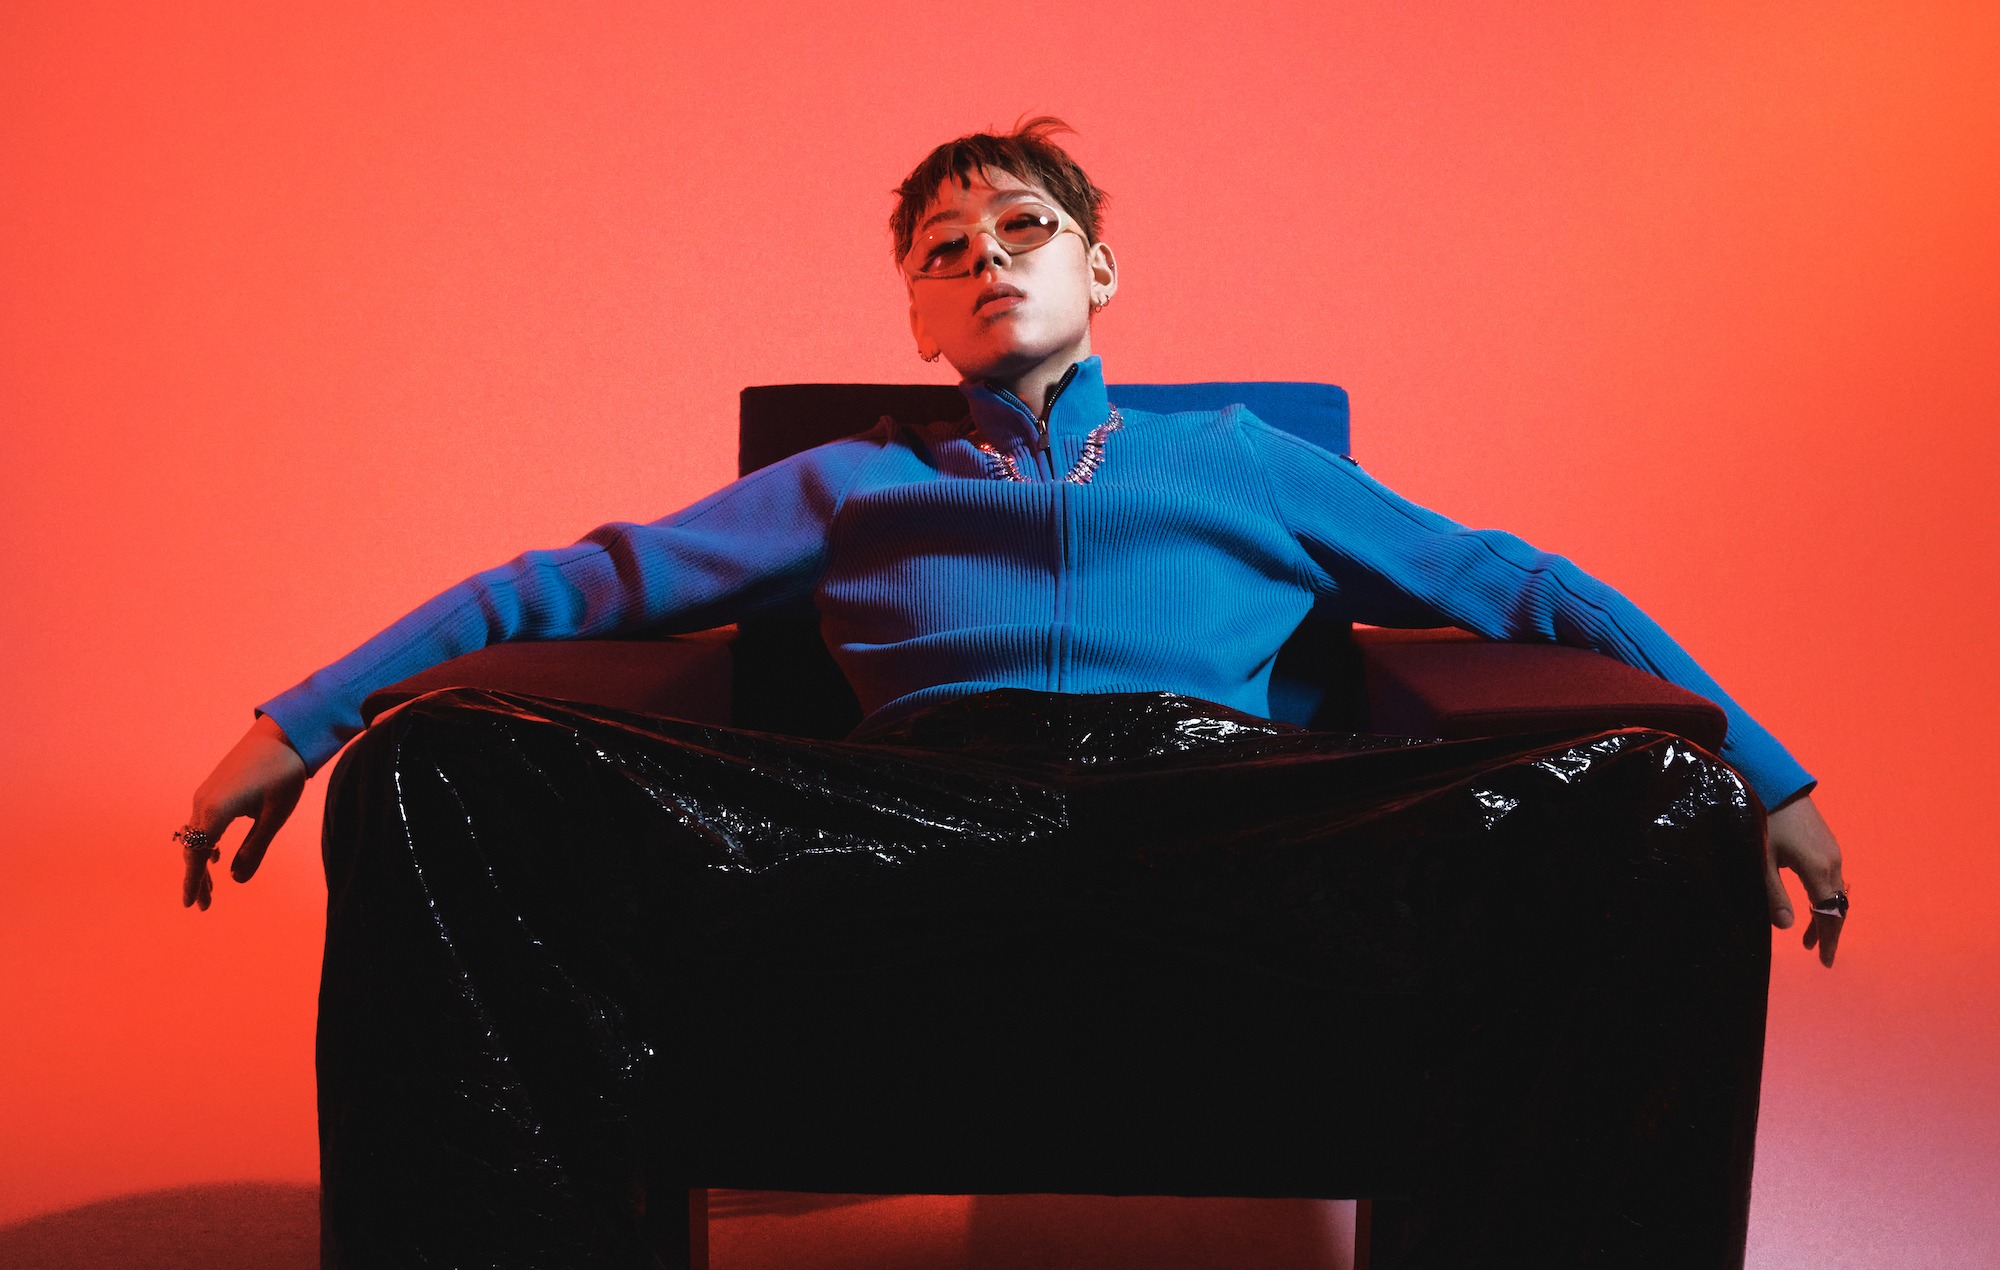 ZICO: “I will do everything in my power to become the pivot of the massive K-pop scene”